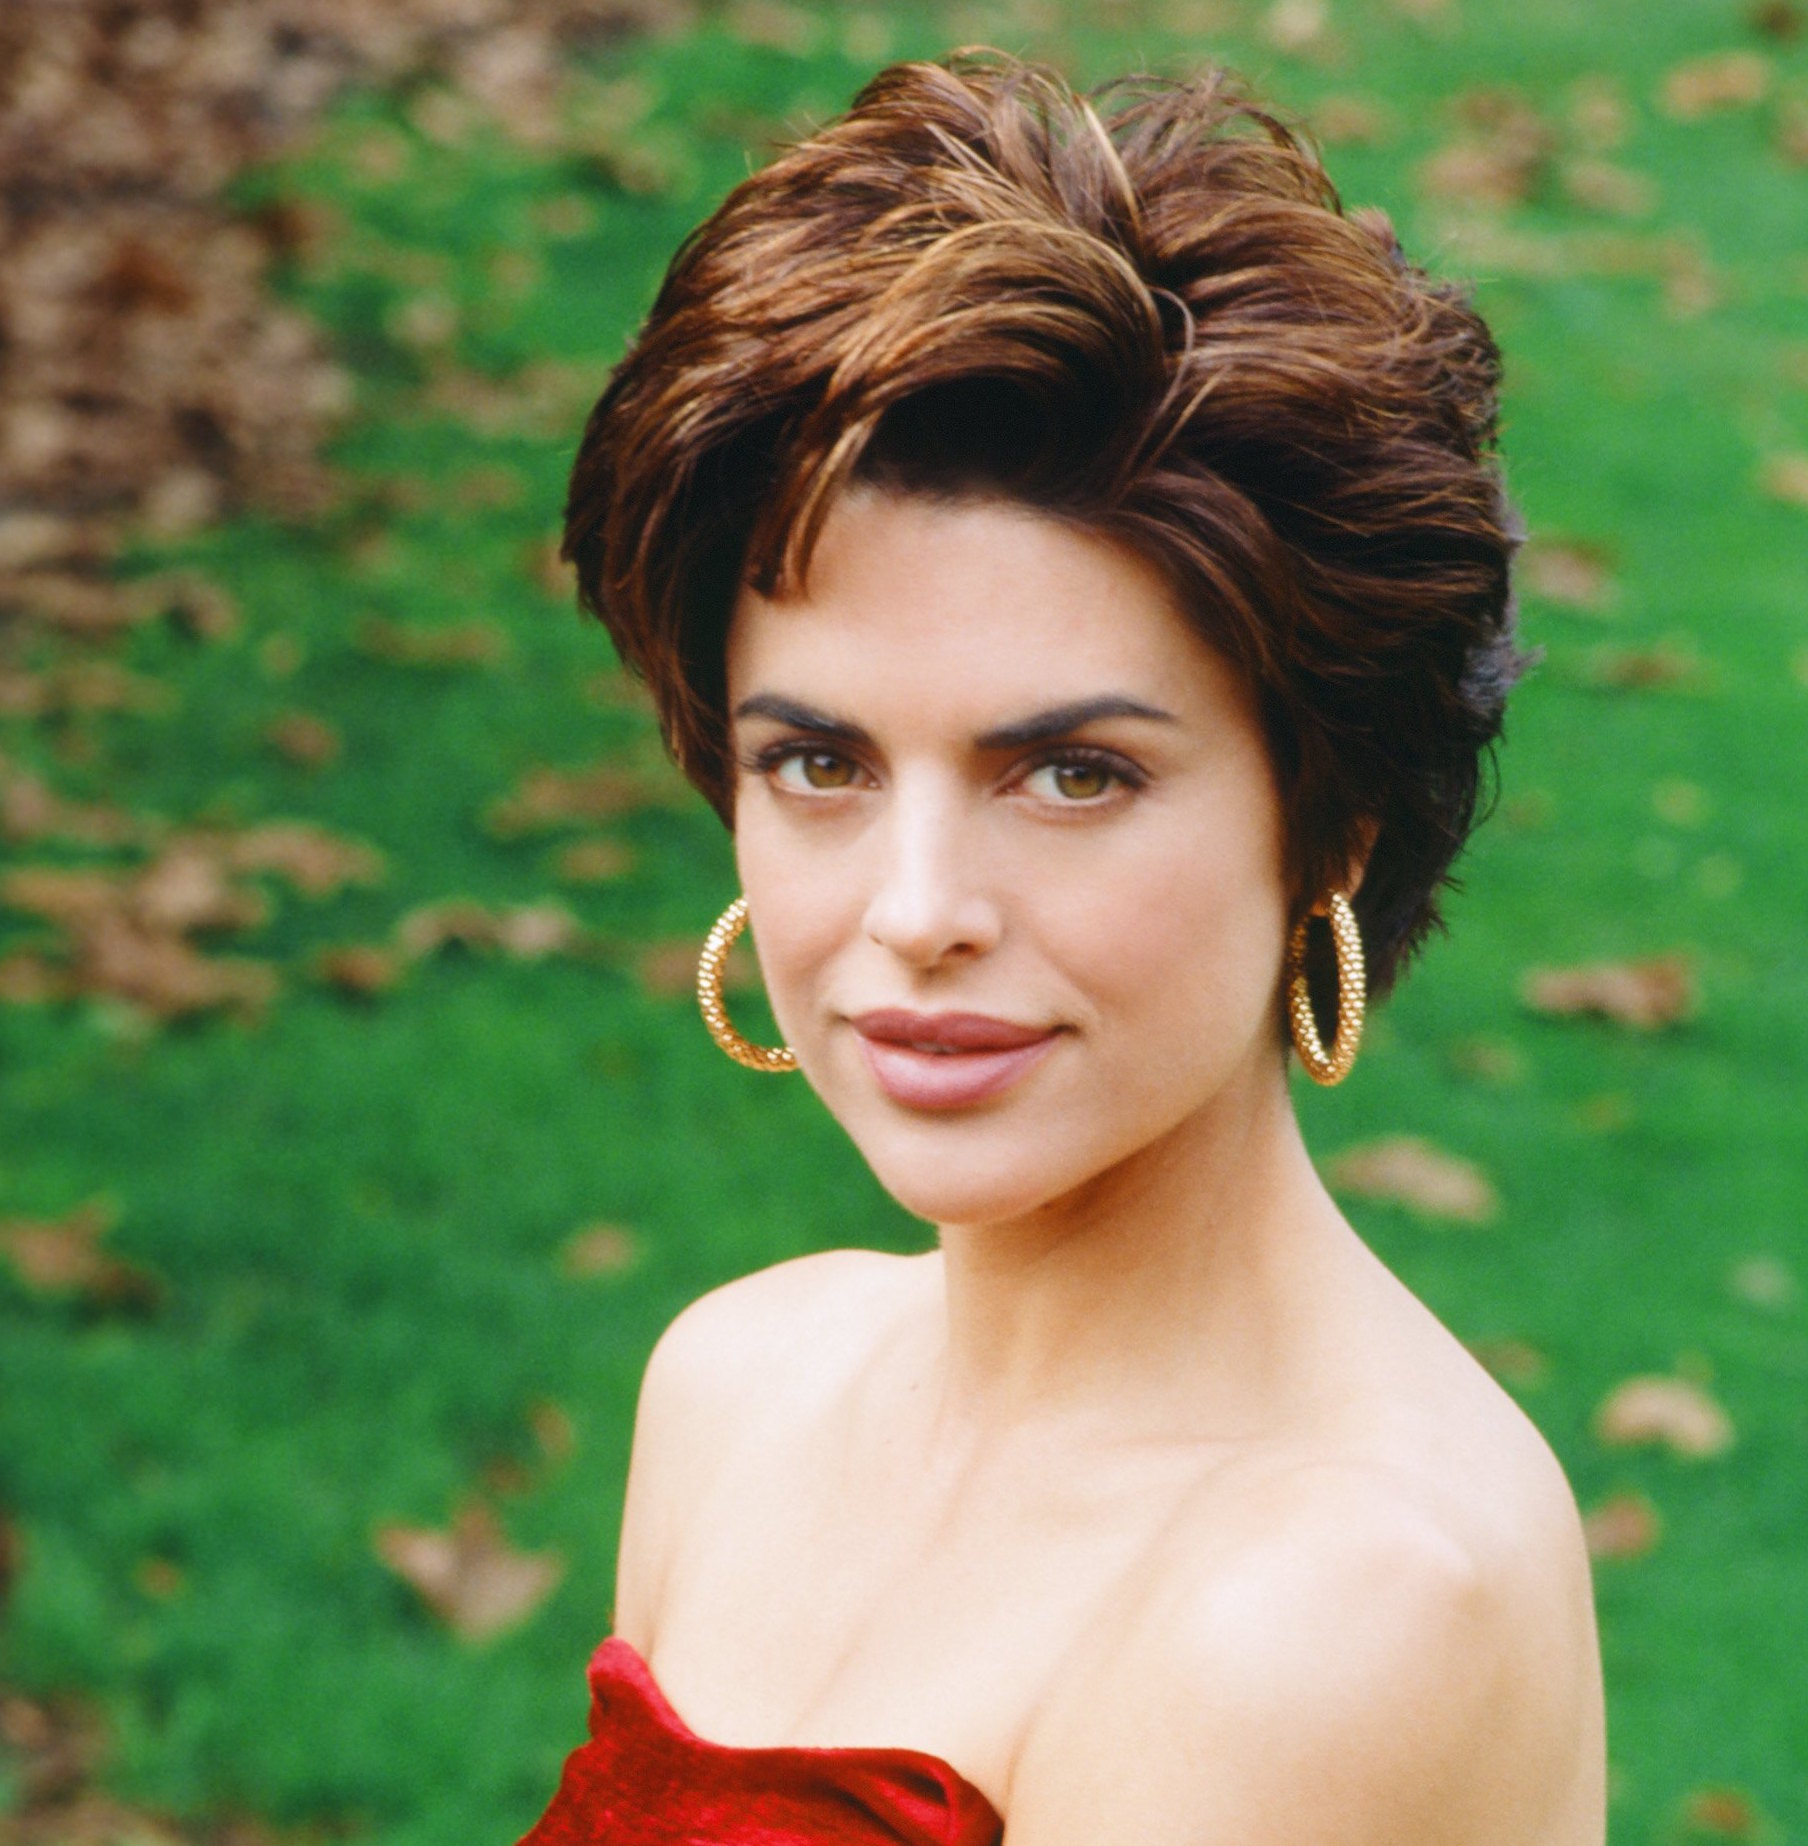 Lisa Rinna Denies Getting More Plastic Surgery After Opening Up About